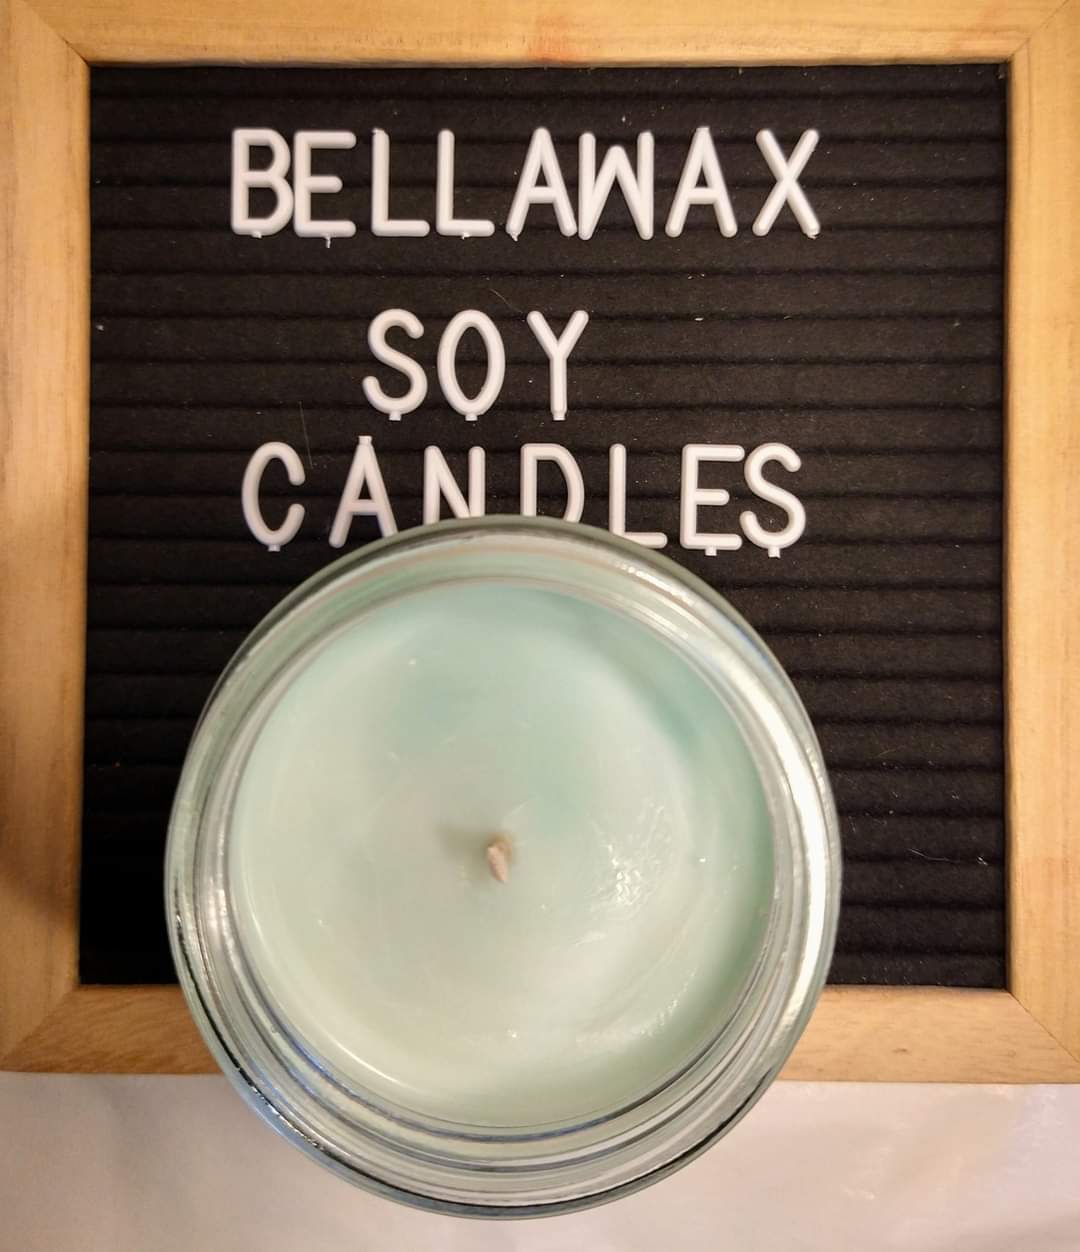 Bellawax Soy Candles sign